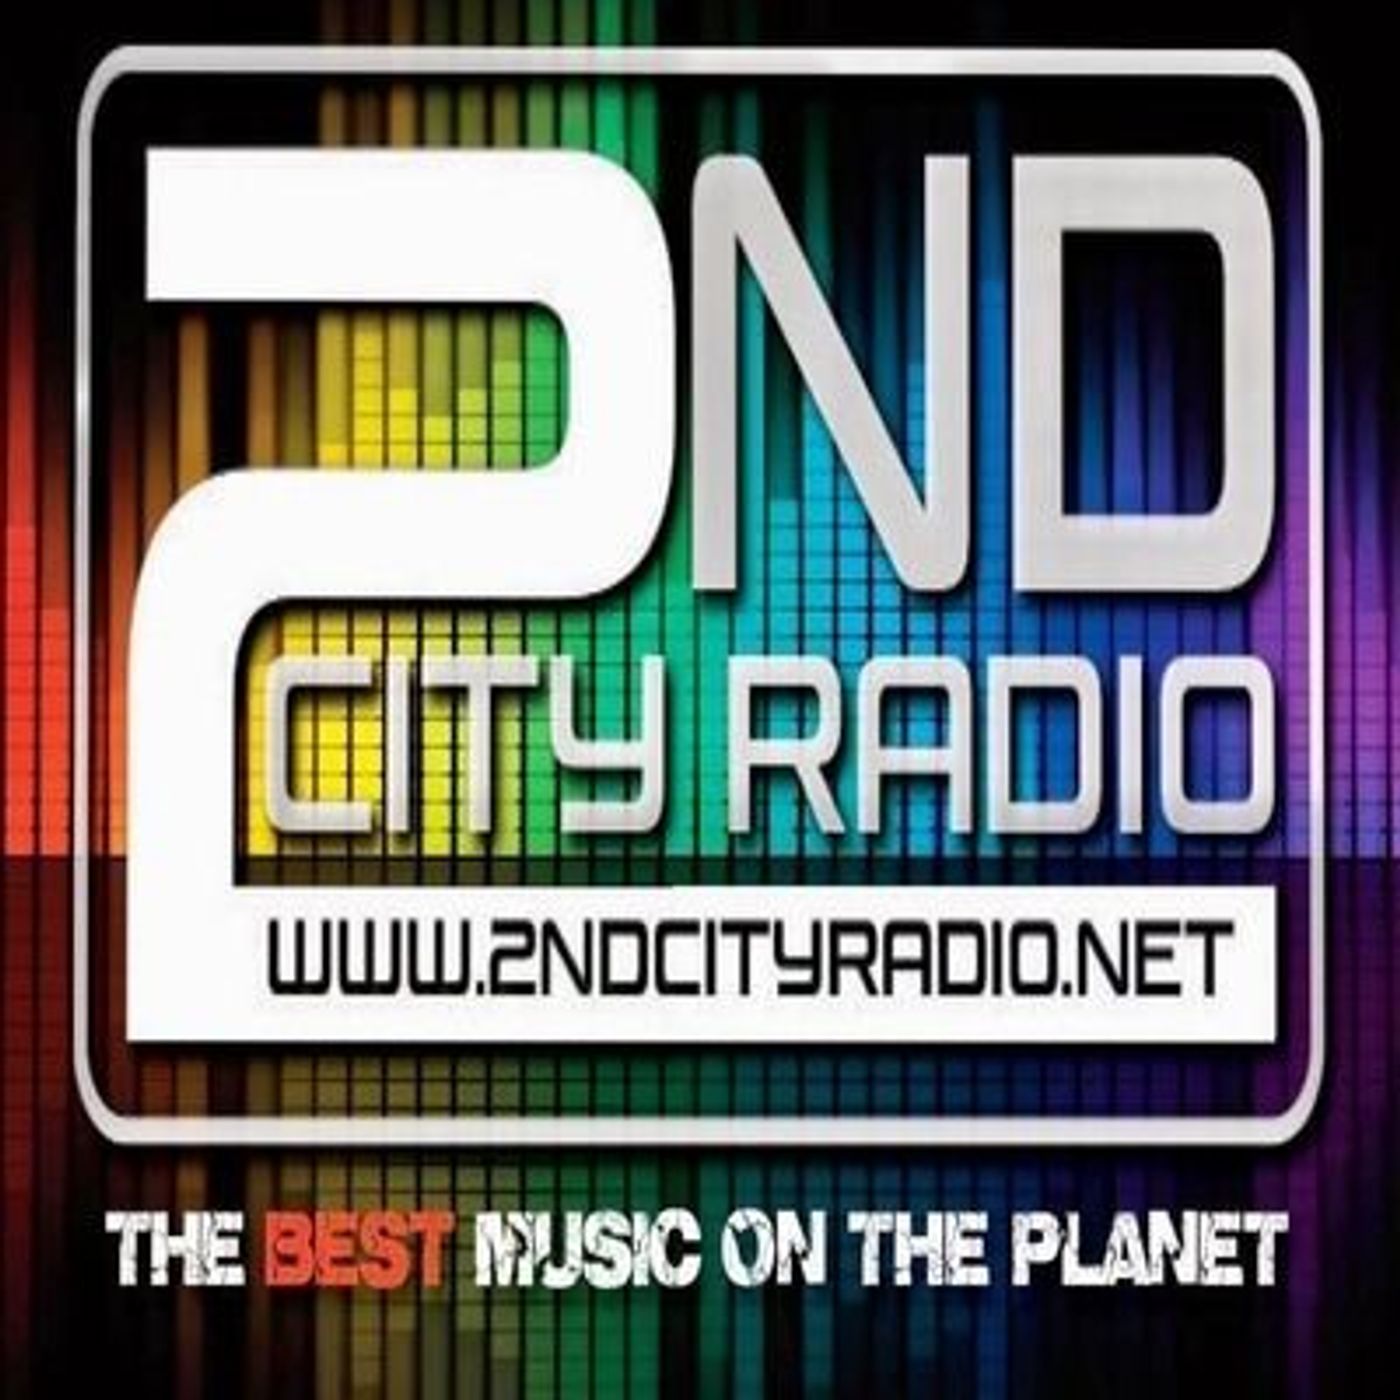 Sunday the 15th of May 2022 on 2ndcity Radio with Classic Chat